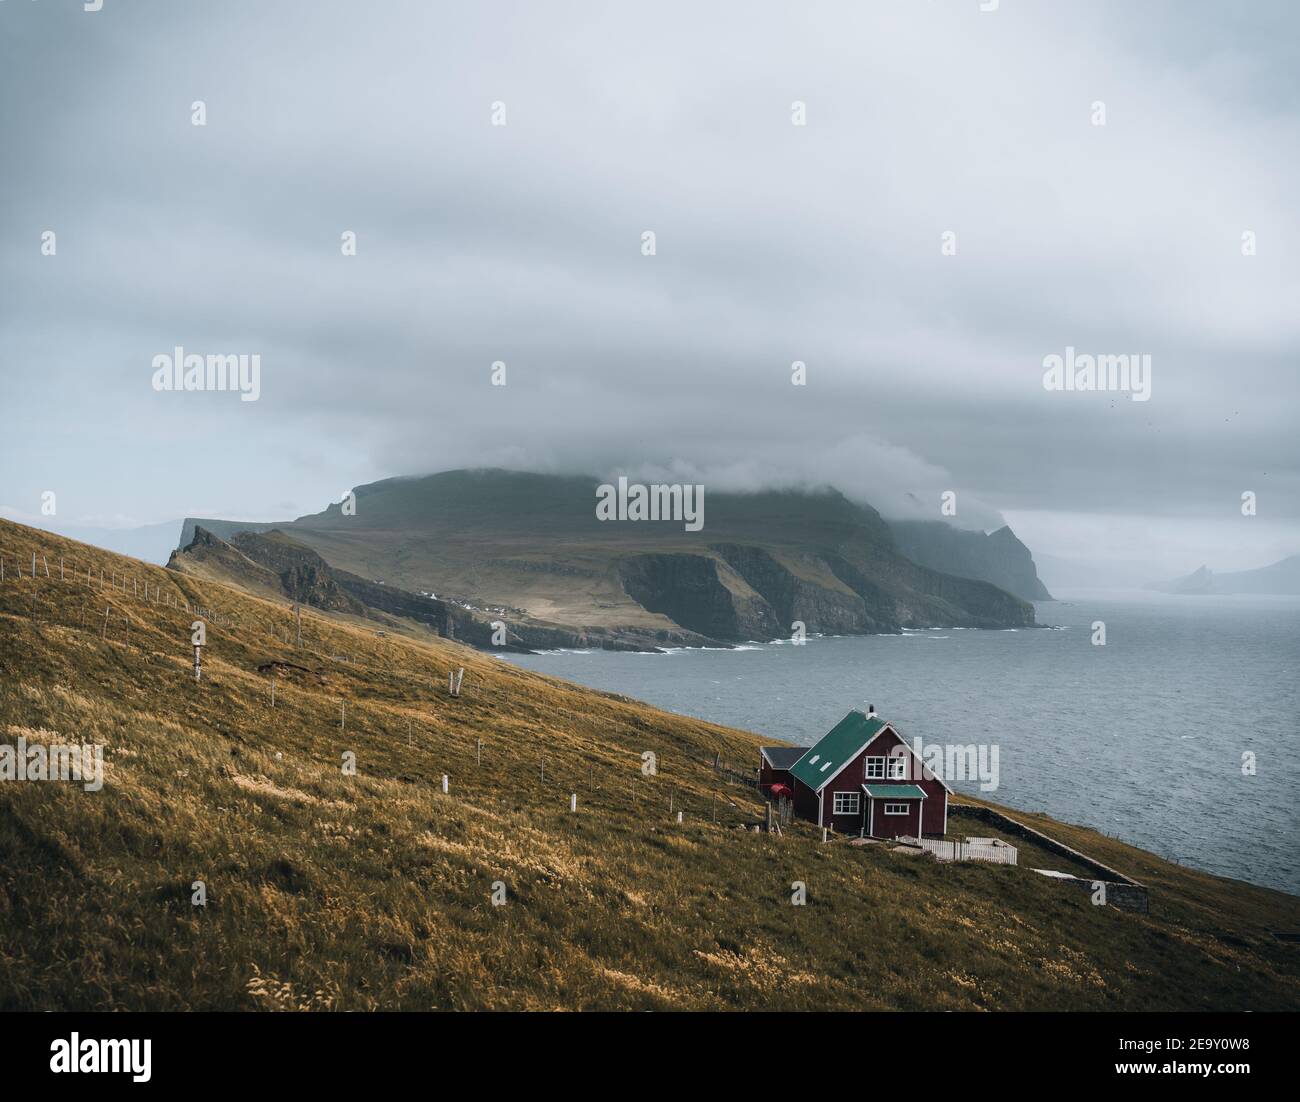 View Towards Lighthouse on the island of Mykines Holmur, Faroe Islandson a cloudy day with view towards Atlantic Ocean. Stock Photo